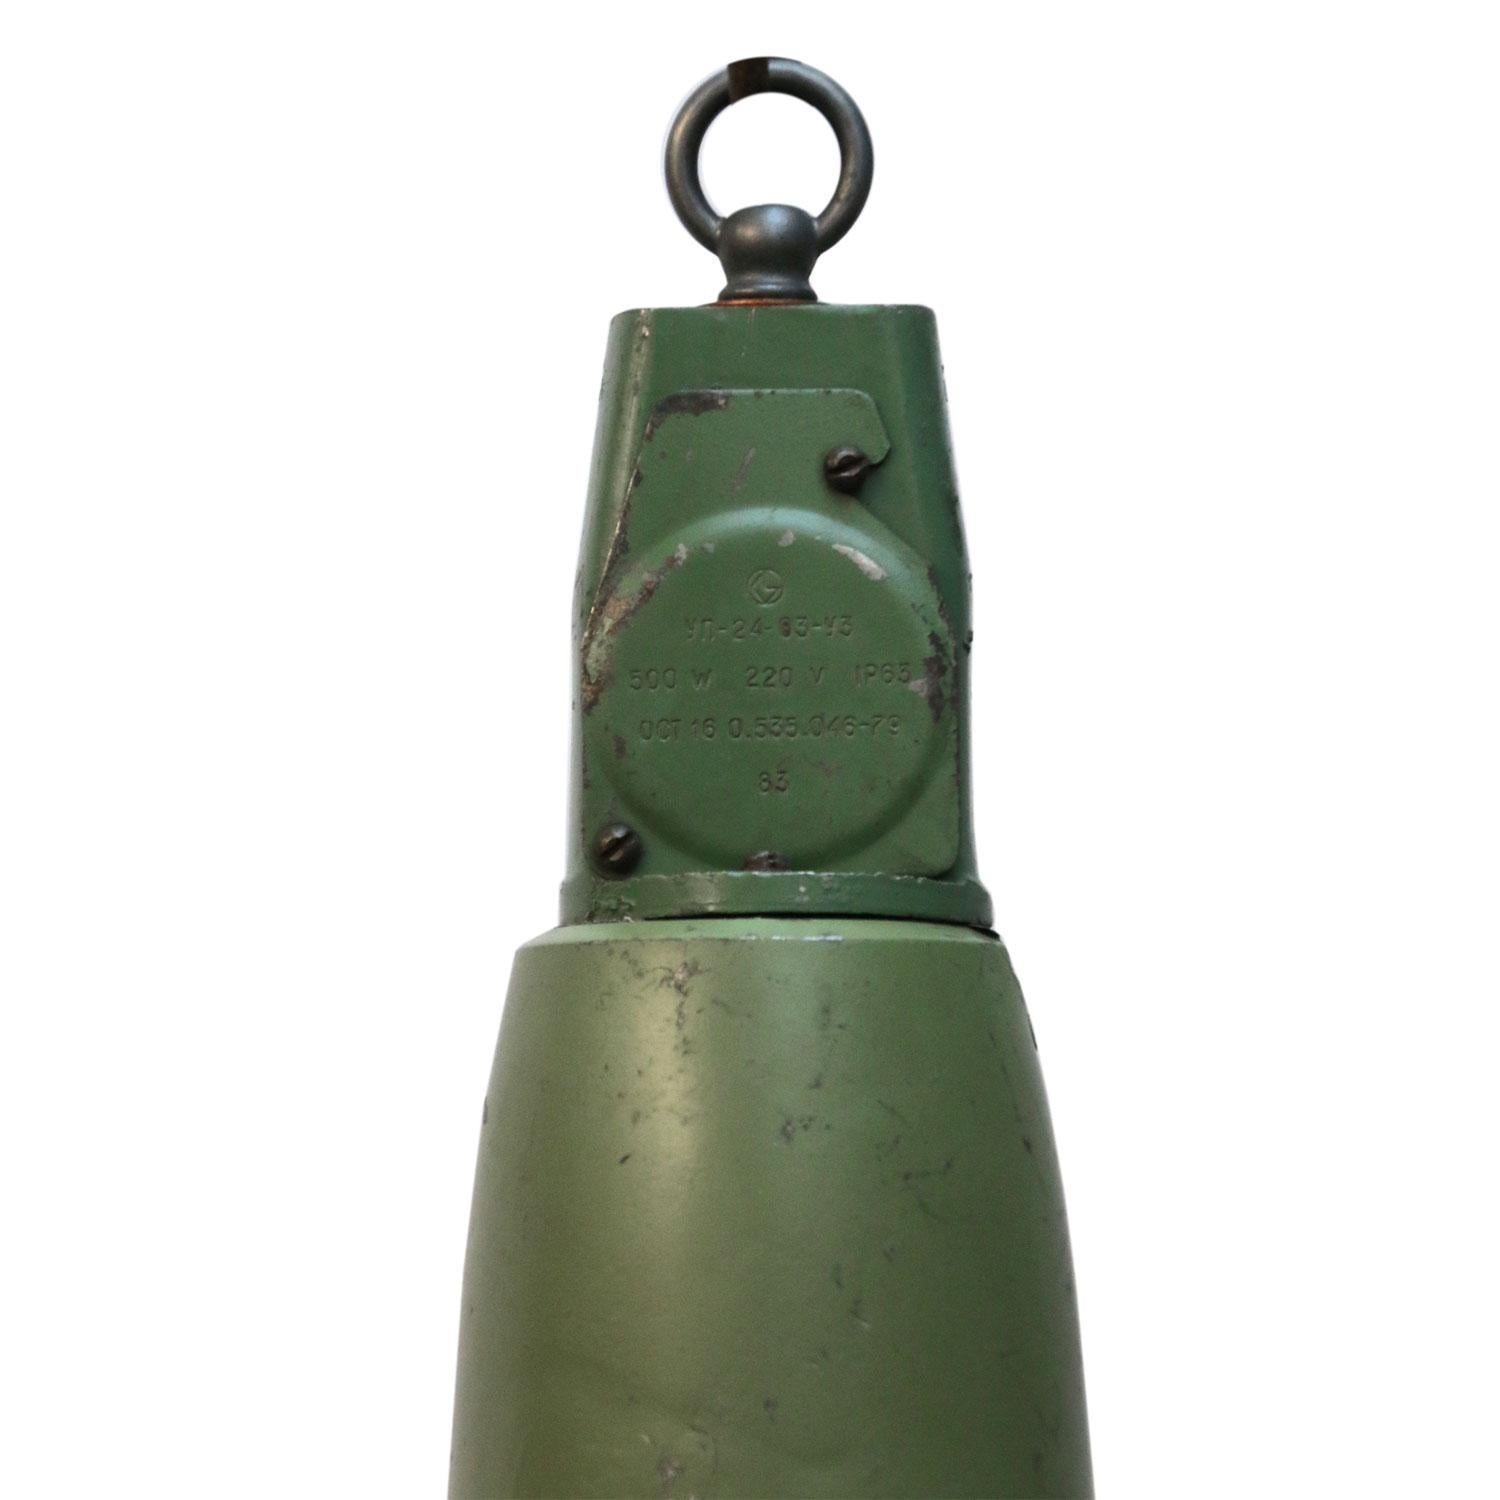 Enamel Industrial pendant. Green enamel shade. White inside.
Green cast aluminium top. Rounded clear glass

Weight: 5.6 kg / 12.3 lb

Priced per individual item. All lamps have been made suitable by international standards for incandescent